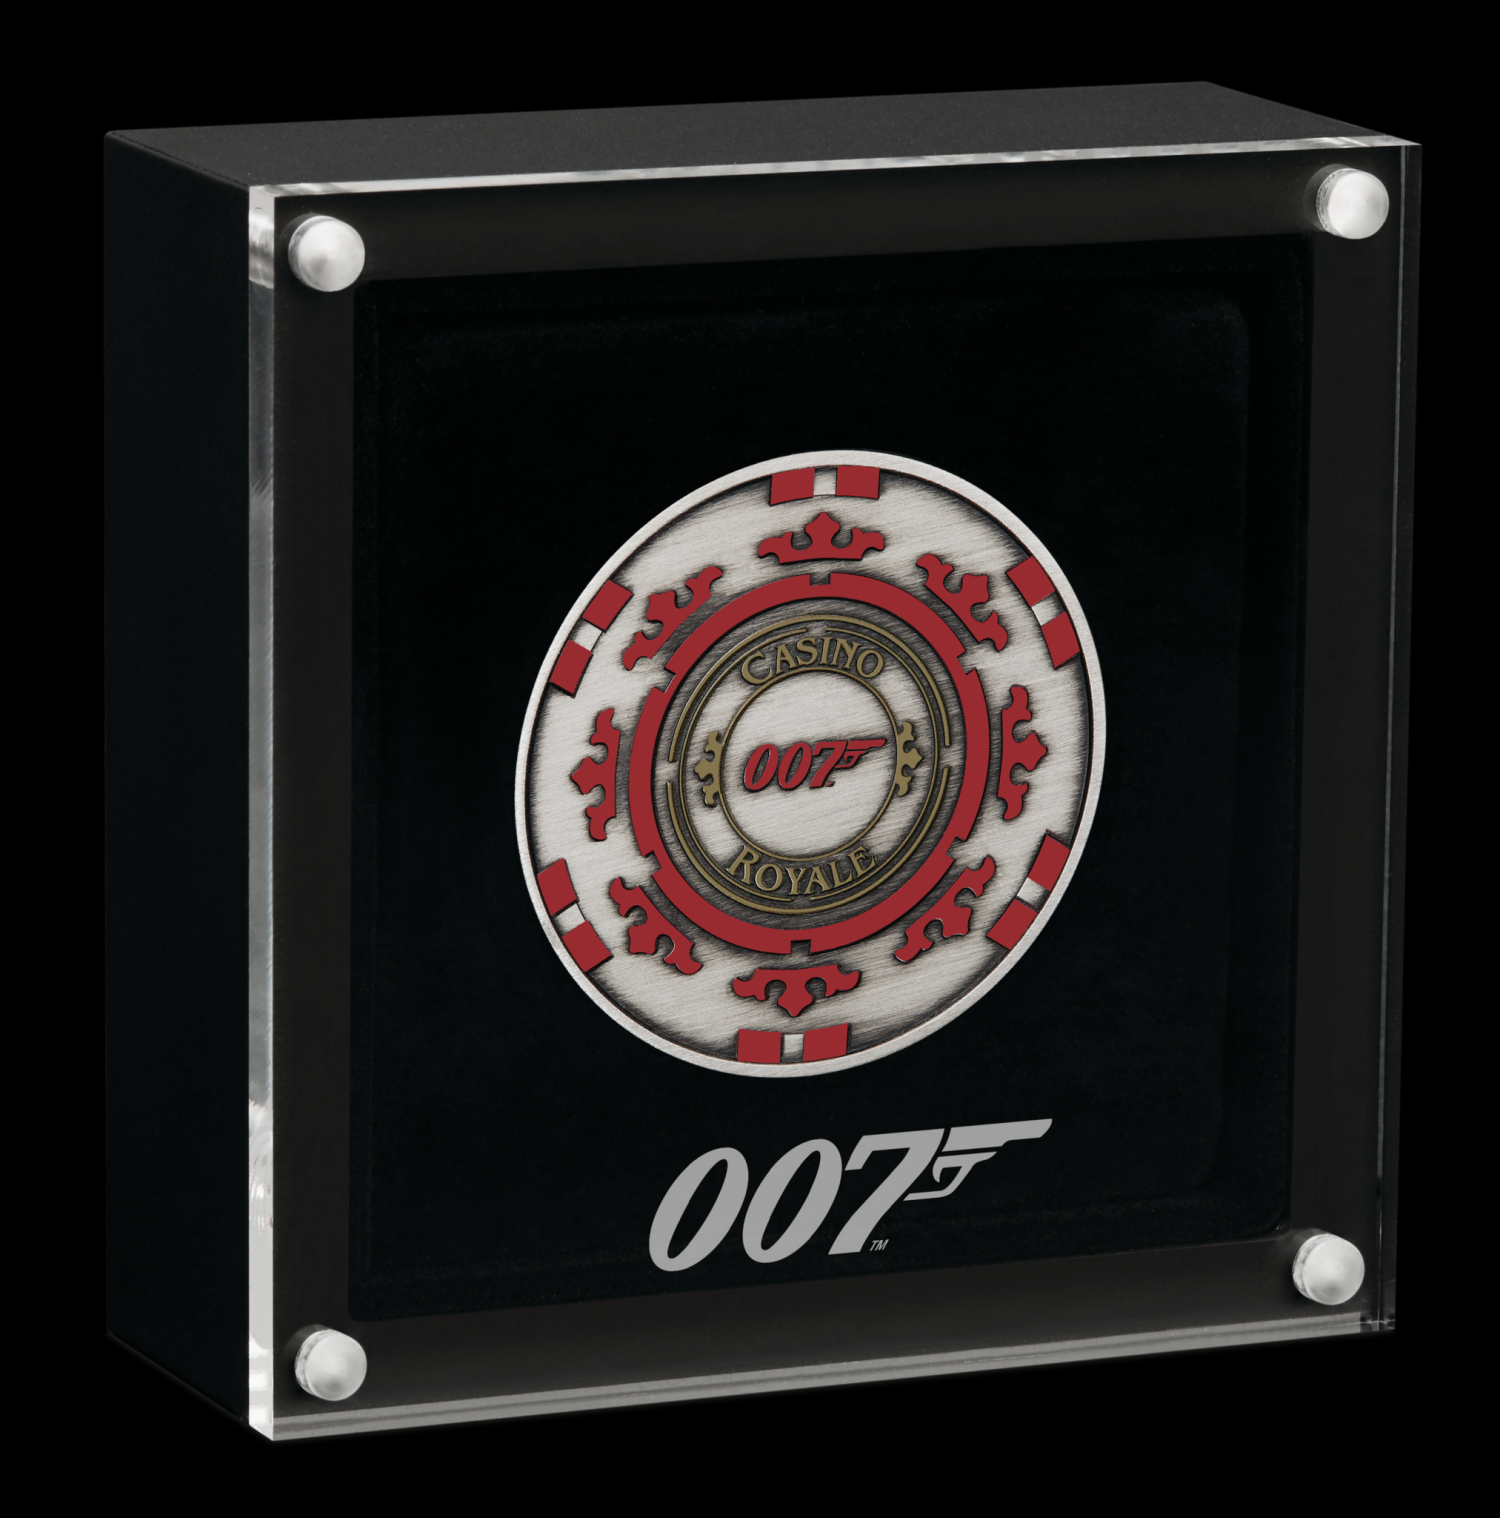 Thumbnail for 2023 $1 James Bond Casino Royale Casino Chip 1oz Silver Antiqued Coloured Coin in Box